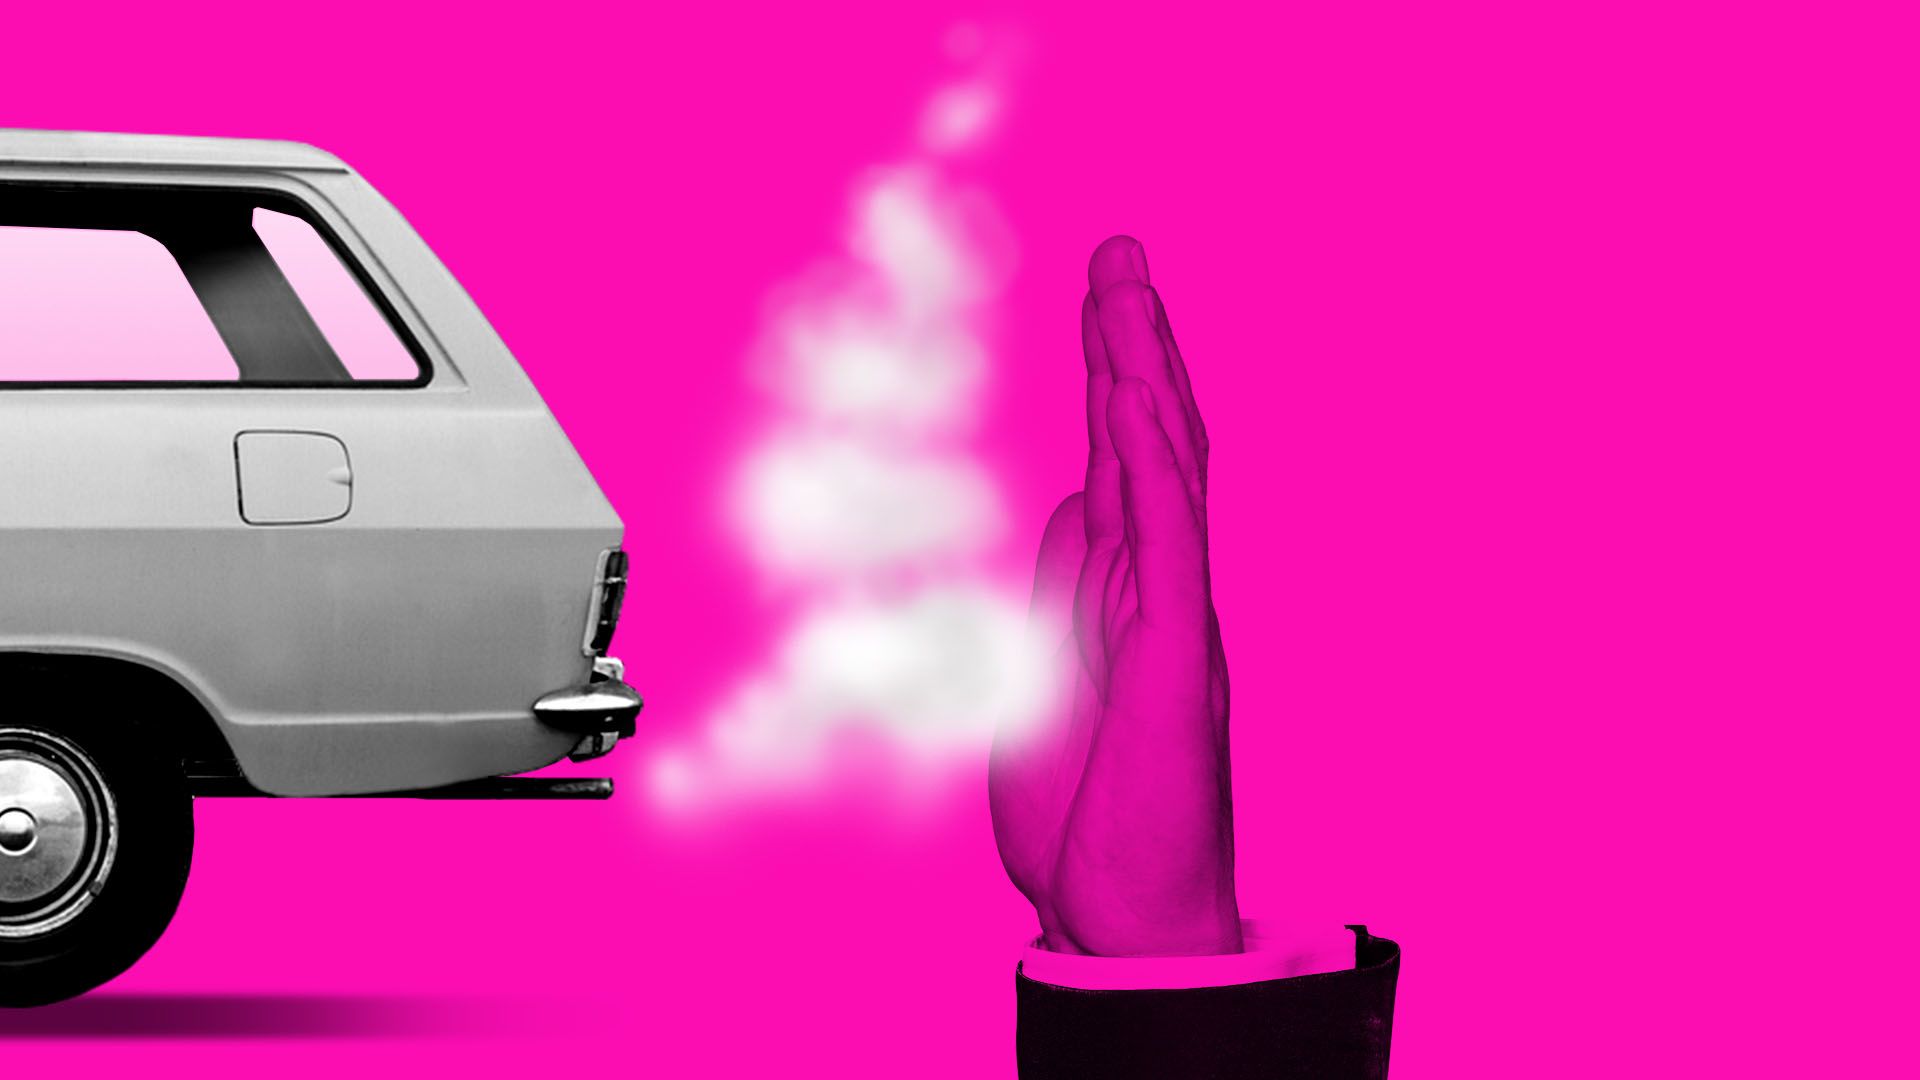 In this illustration, a hand motions to stop the exhaust coming from a car. There is a pink background.